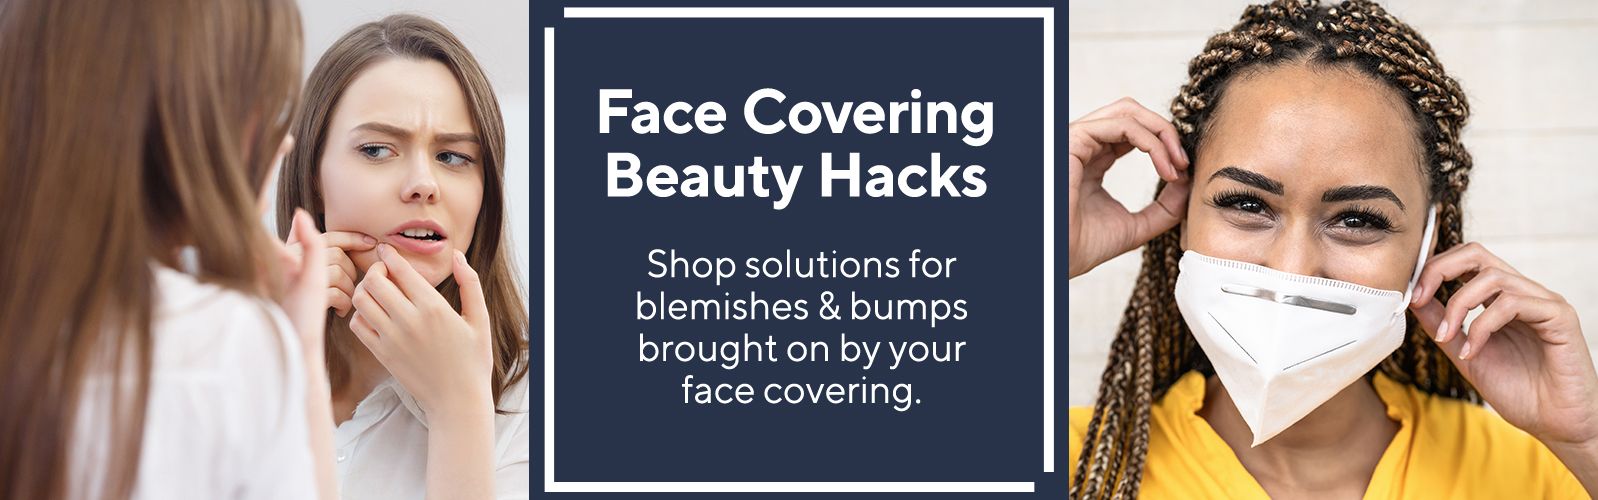 Face Covering Beauty Hacks - Shop solutions for blemishes & bumps brought on by your face covering.